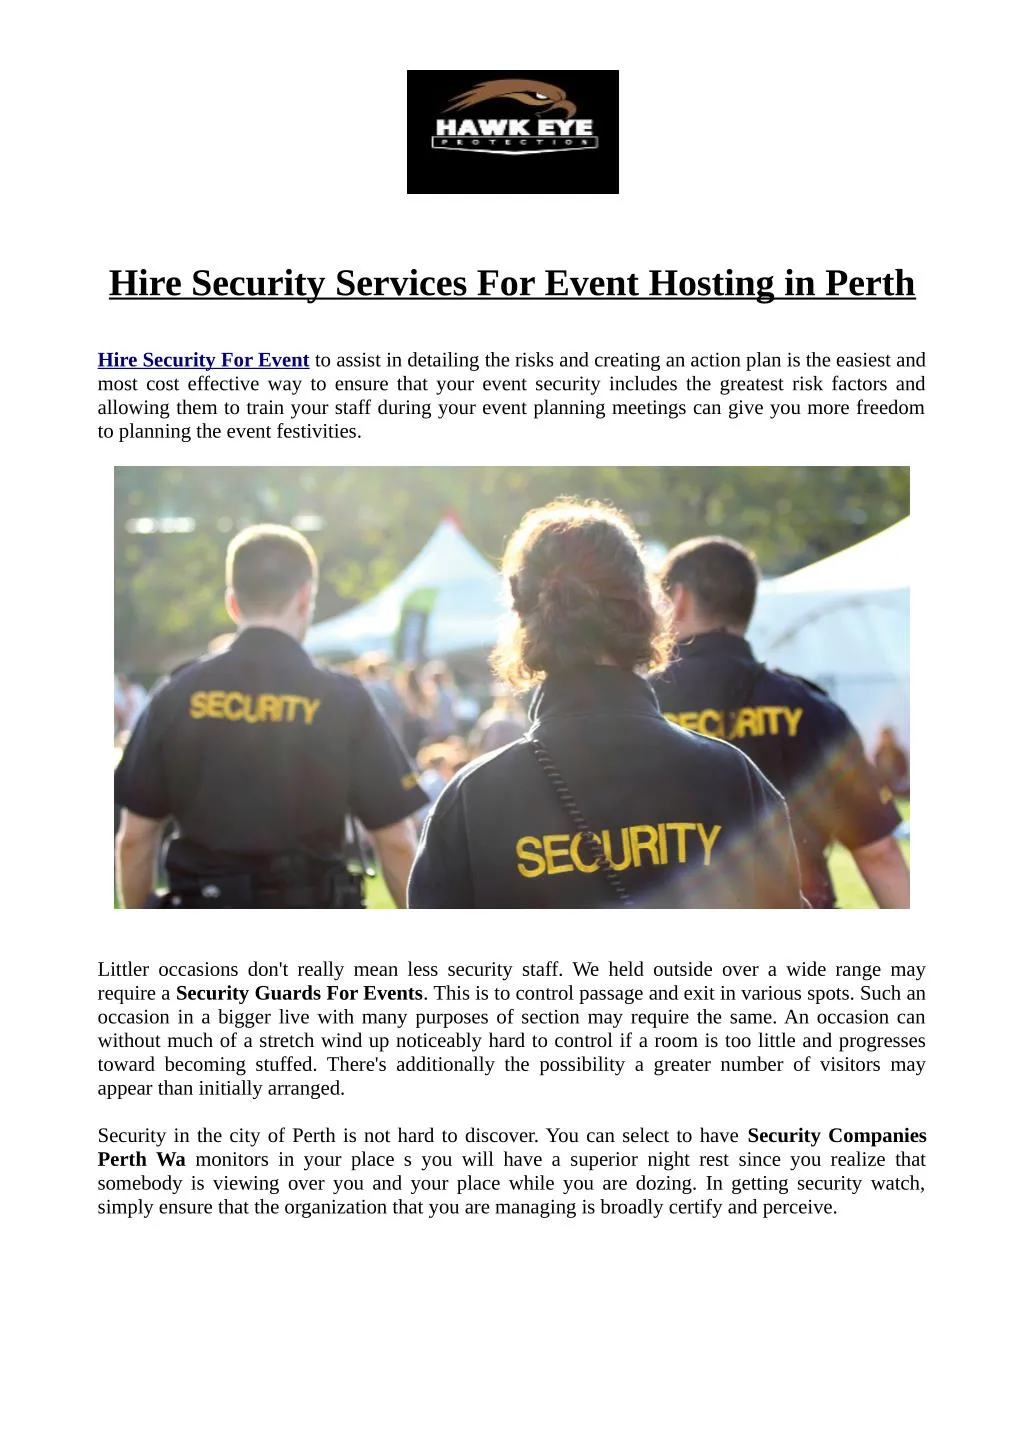 hire security services for event hosting in perth n.